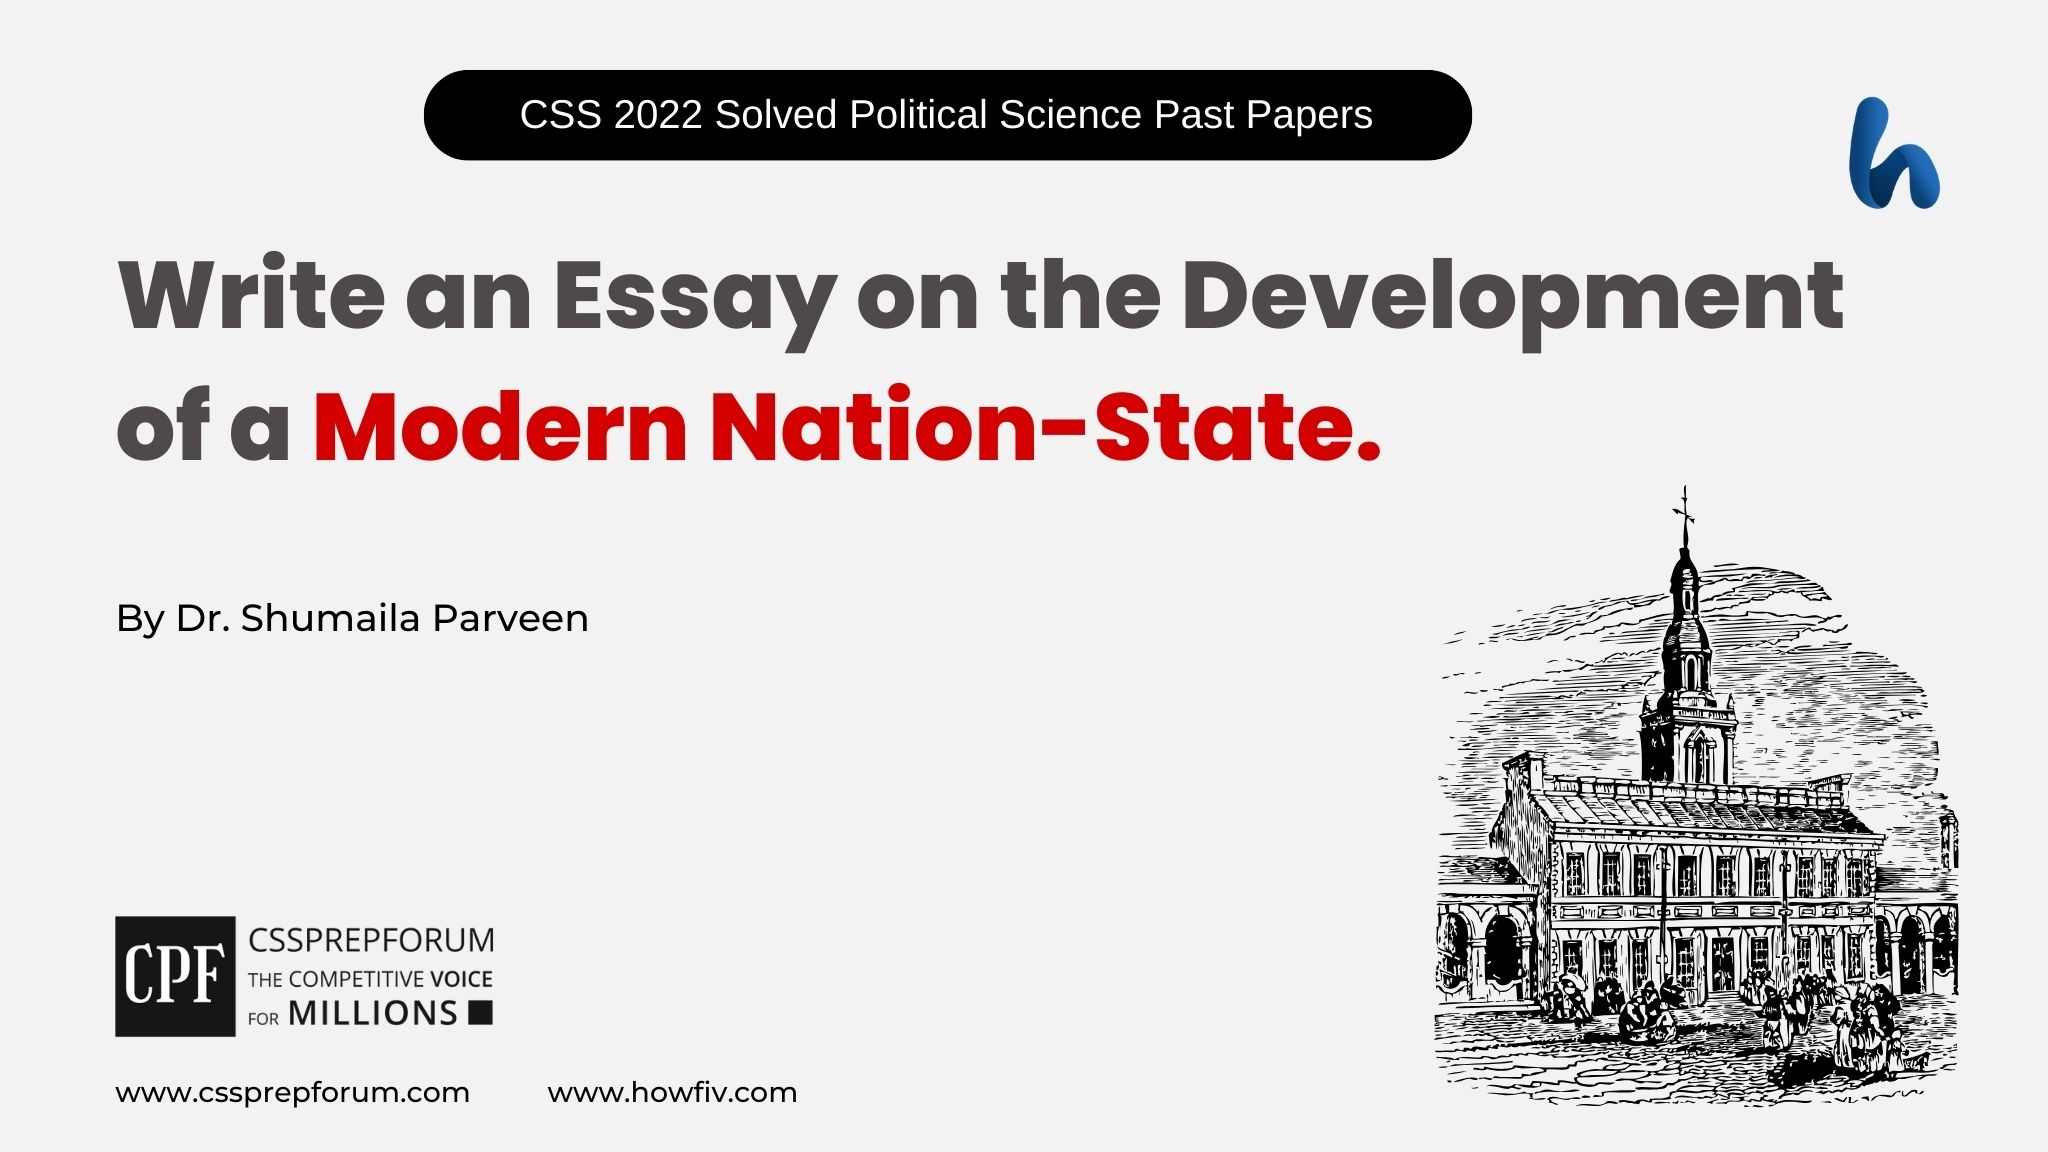 The Development of a Modern Nation-State by Dr. Shumaila Parveen